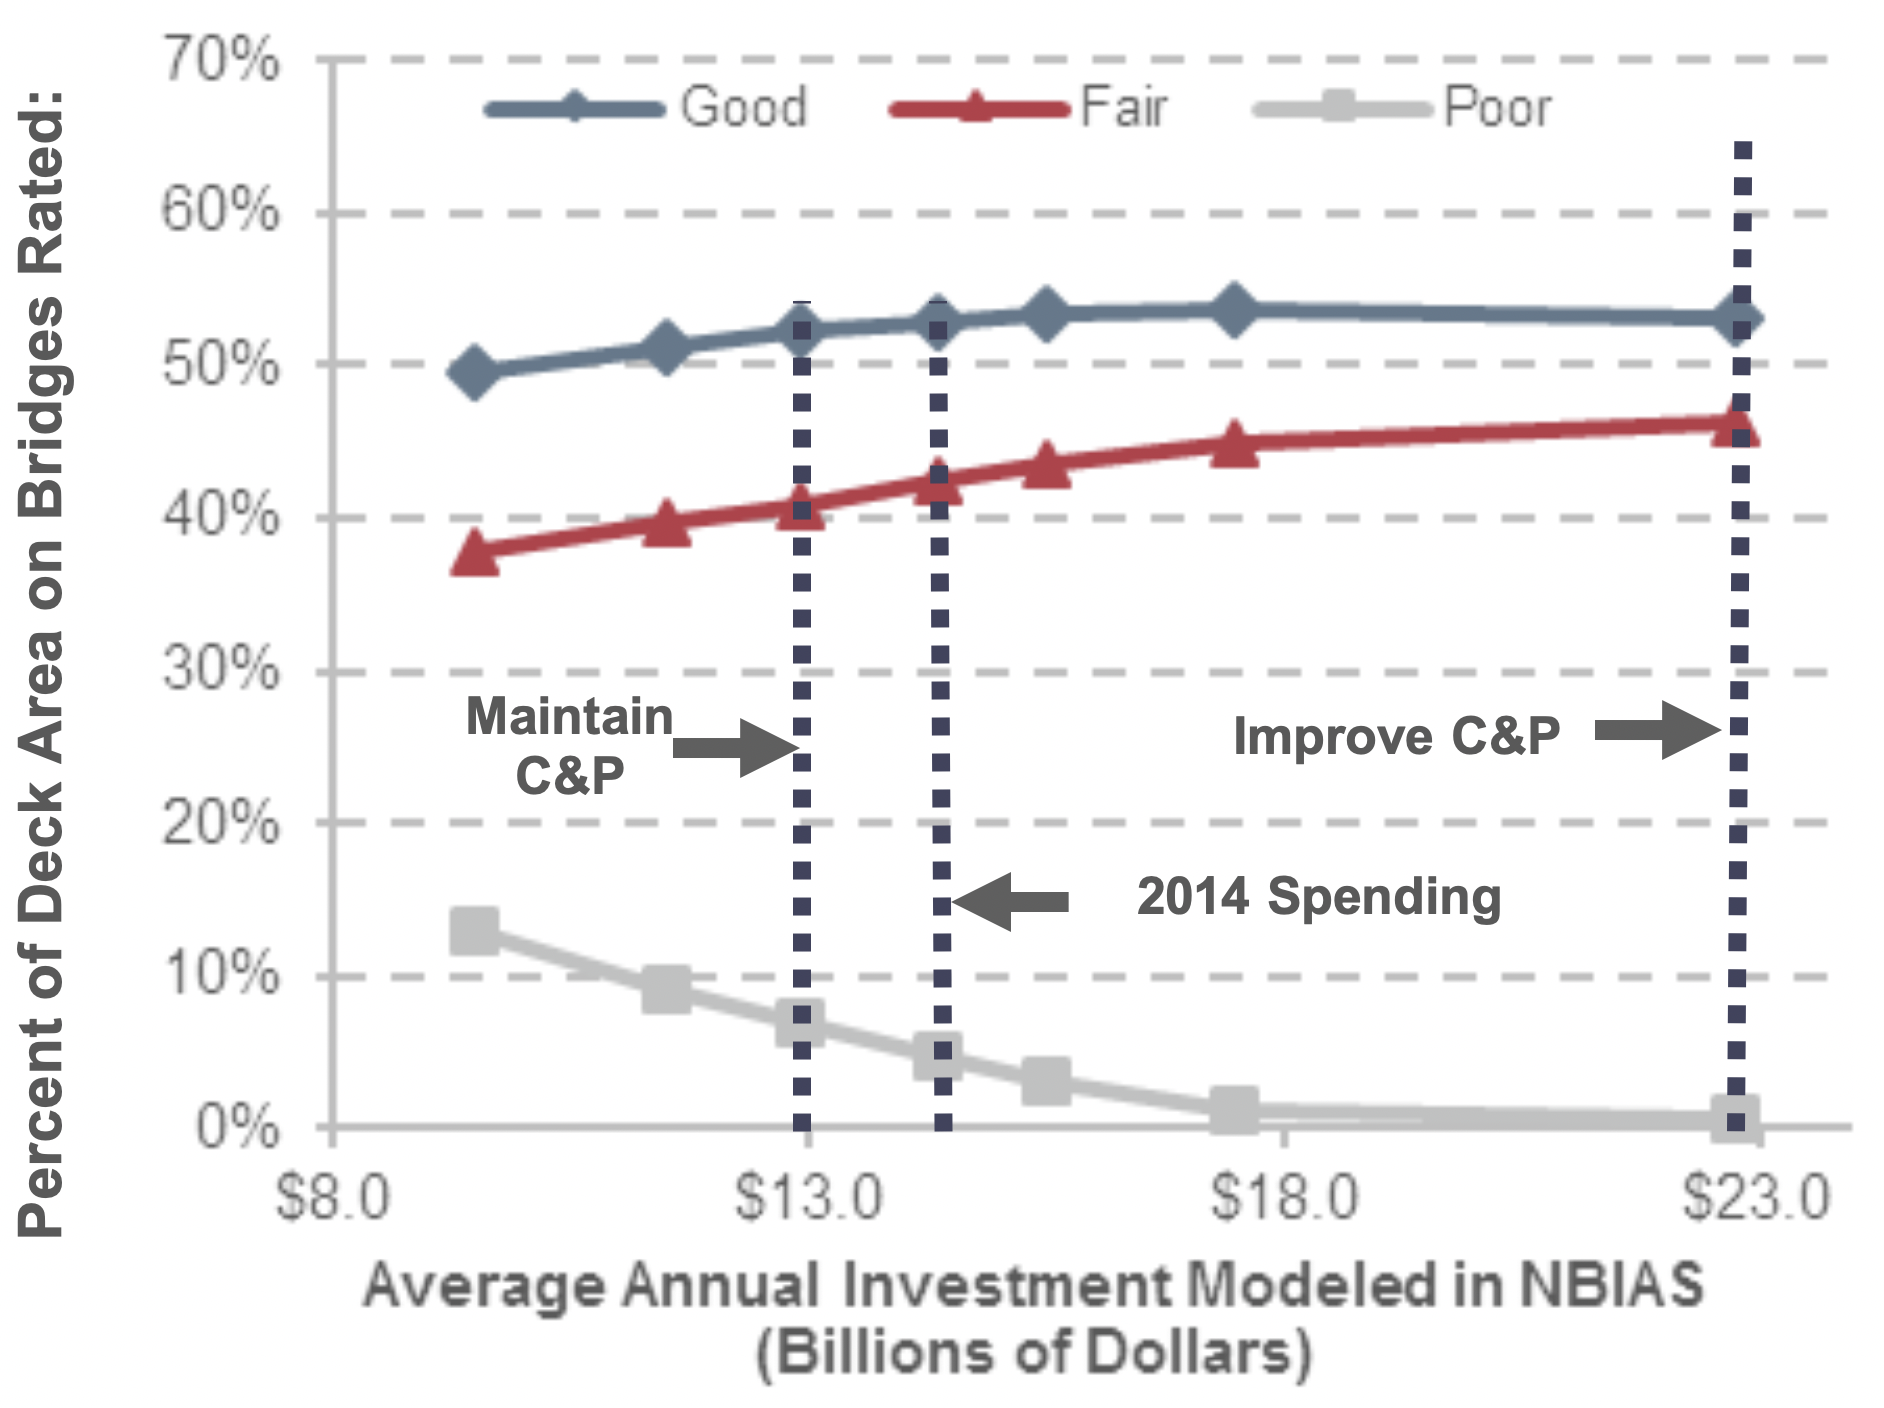 A line graph plots values for percent of deck area on bridges classified as good, fair, or poor over average annual investment in billions of 2014 dollars modeled in NBIAS. The values corresponding to the NBIAS inputs to three different scenarios—Maintain C&P ($12.9 billion), 2014 Spending ($14.1 billion), and Improve C&P ($22.7 billion)—are highlighted via vertical lines. For the share of good deck area, the plot has an initial value of 49.4 percent of total deck area on bridges at an annual investment of $9.5 billion, with the trend swinging upward to a value of 53.0 percent of total deck area on bridges at an annual investment of $22.7 billion. For the share of fair deck area, the plot has an initial value of 37.7 percent of total deck area on bridges at an annual investment of $9.5 billion, with the trend swinging upward to a value of 46.3 percent of total deck area on bridges at an annual investment of $22.7 billion. For the share of poor deck area, the plot has an initial value of 12.9 percent of total deck area on bridges at an annual investment of $9.5 billion, with the trend swinging downward to a value of 0.6 percent of total deck area on bridges at an annual investment of $22.7 billion. Source: National Bridge Investment Analysis System.